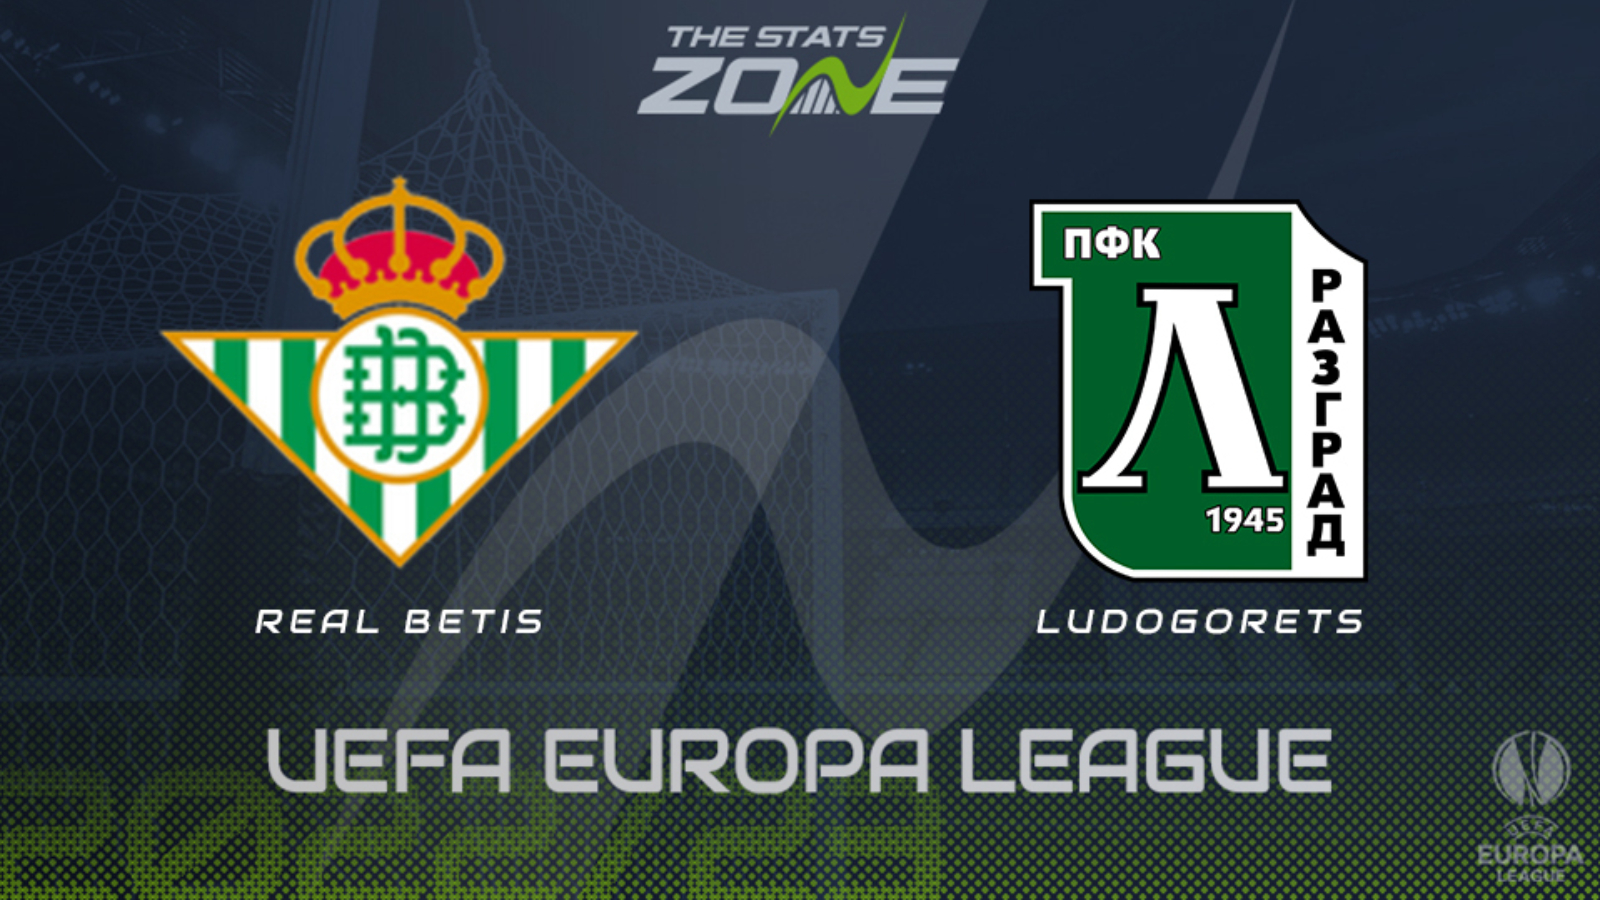 Real Betis vs Ludogorets - Group Stage - Preview & Prediction - 2022-23 UEFA Europa League - The Stats Zone